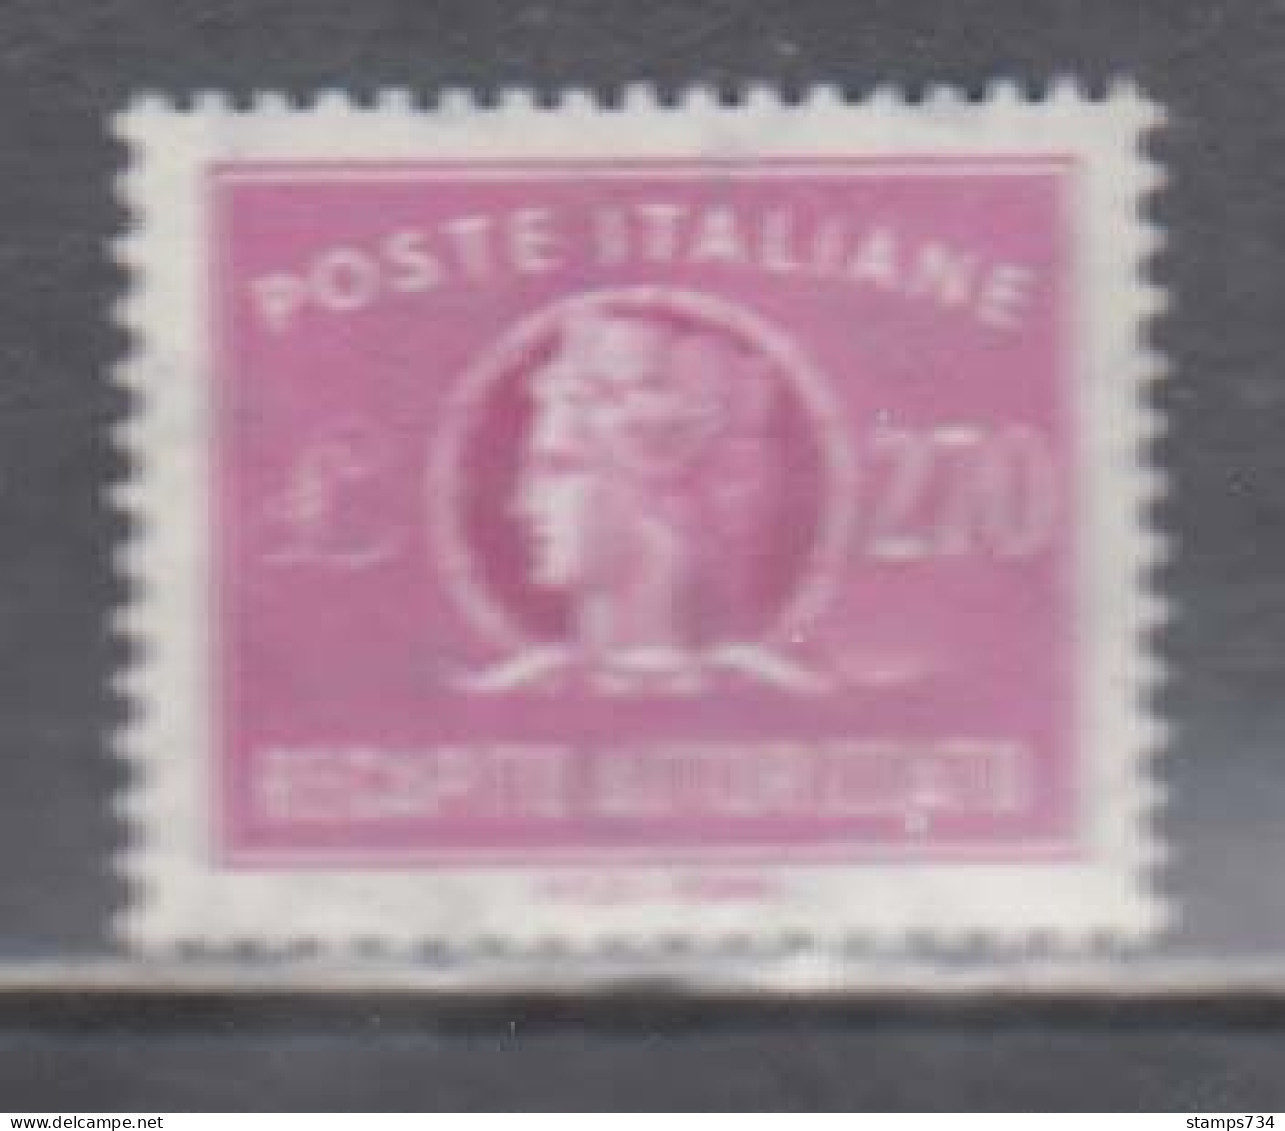 Italy 1987 - Consigned Parcels, Mi-Nr. 15, MNH** - Colis-concession